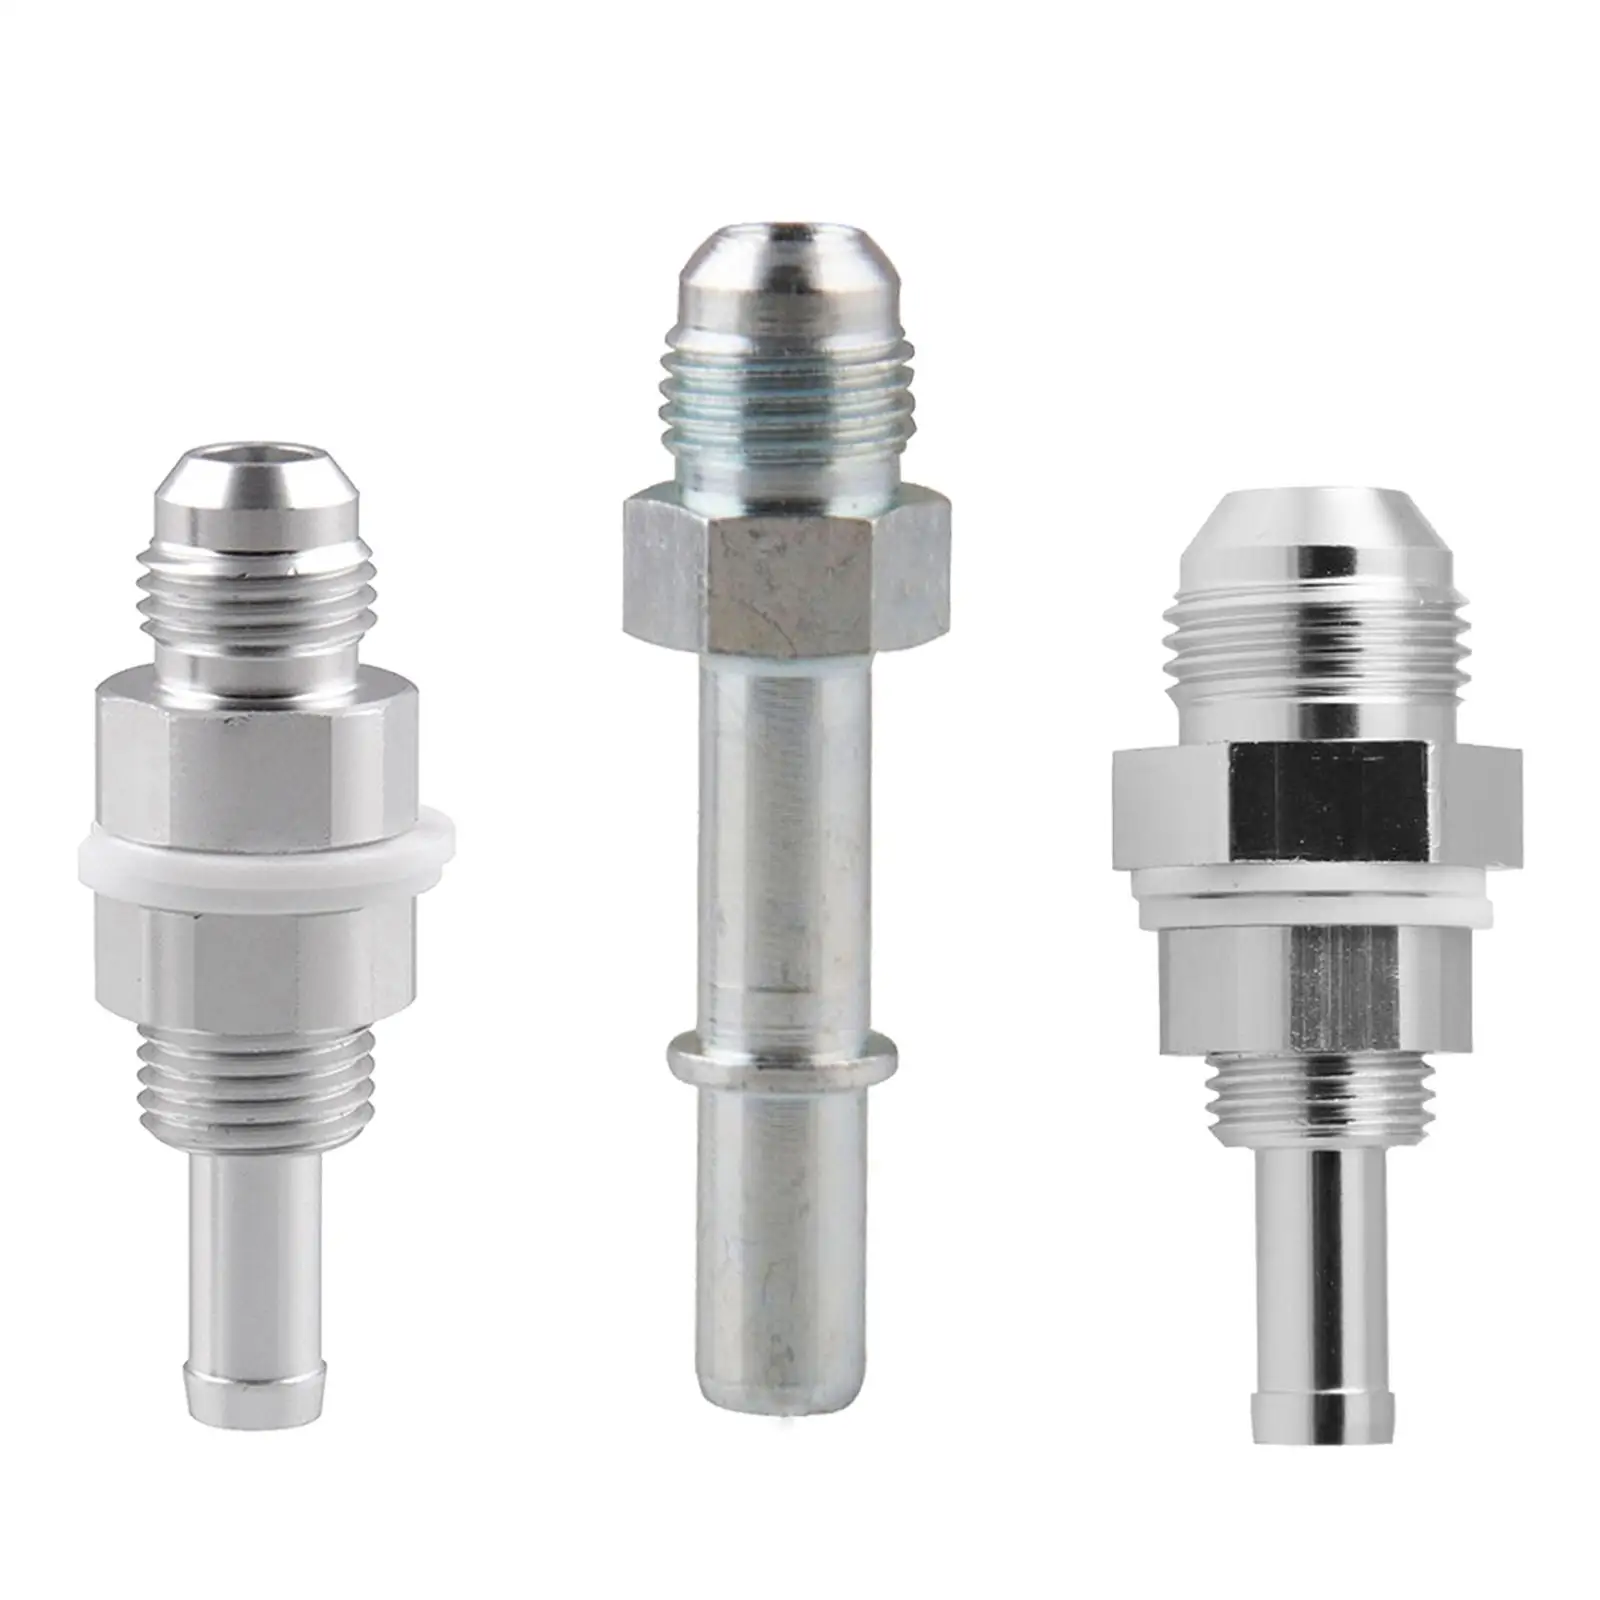 Heavy-duty Oil End Fitting Converter CNC Precision Machining Leak-free, Durable to Use and Operate